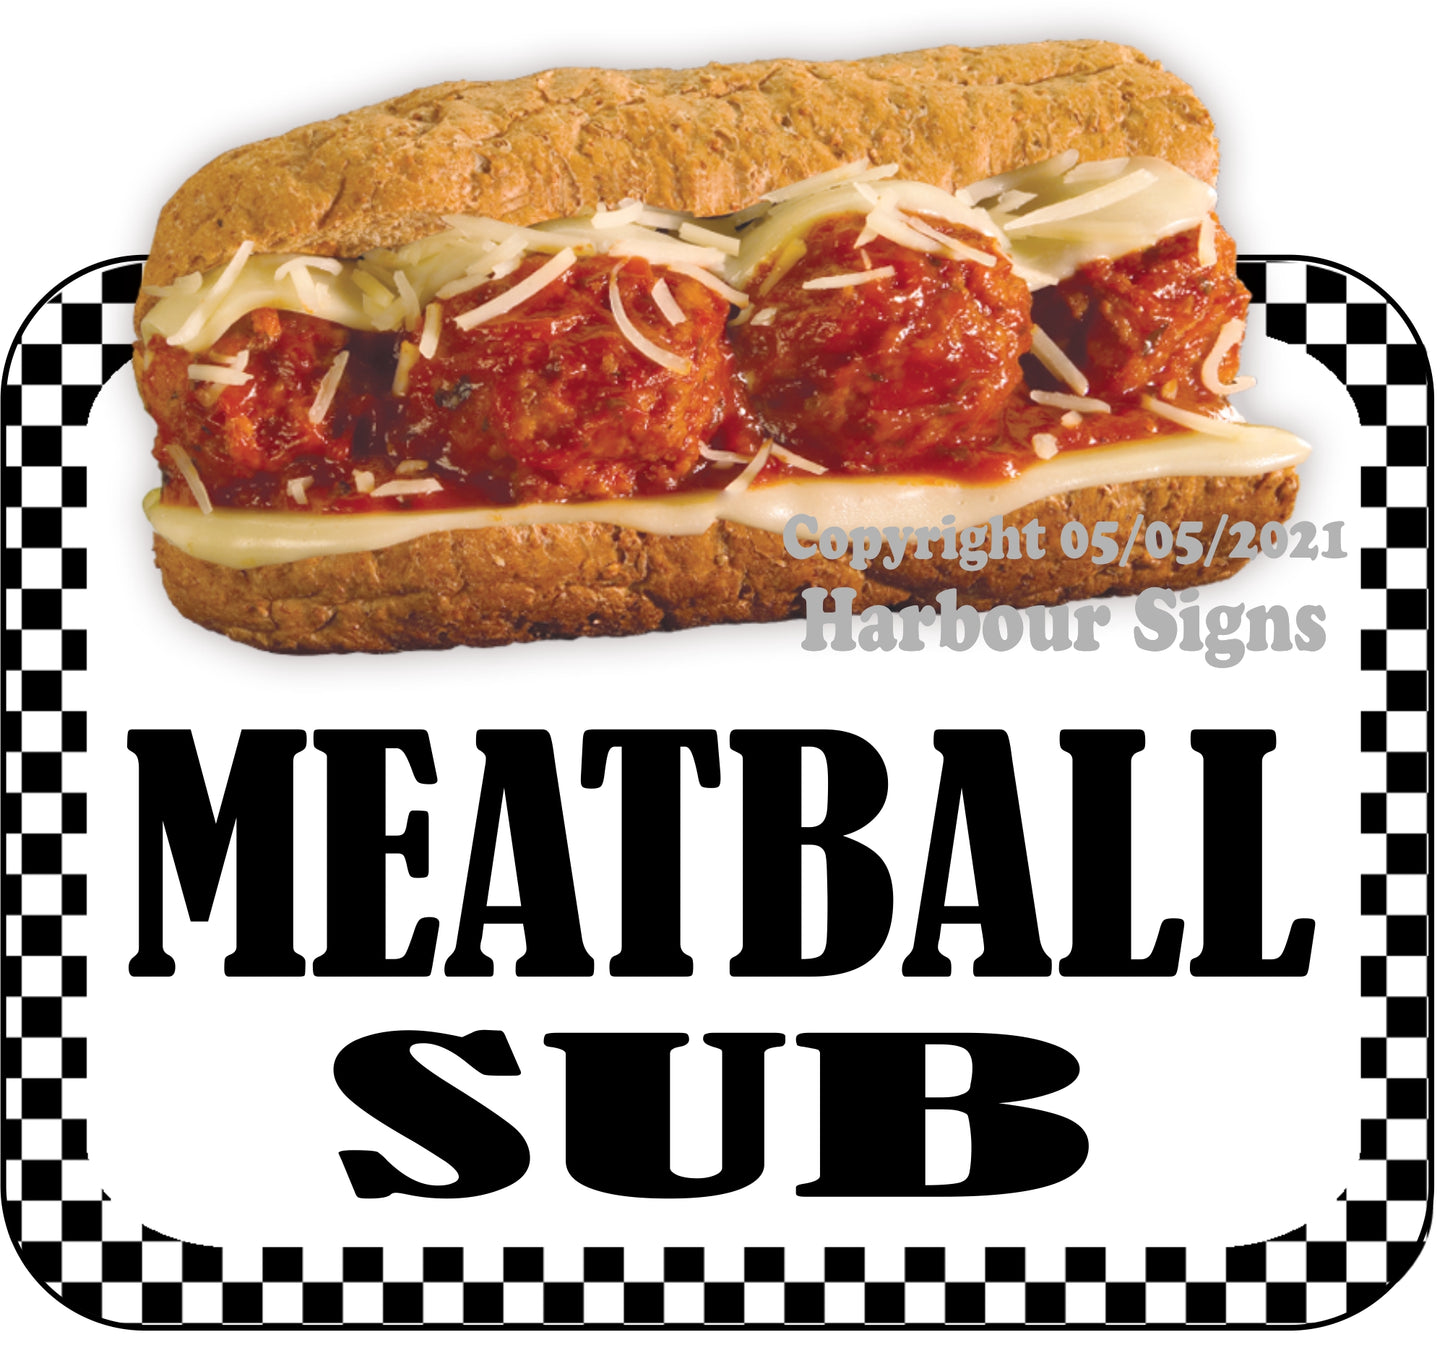 Meatball Sub Decal Food Truck Concession Vinyl Sticker bw